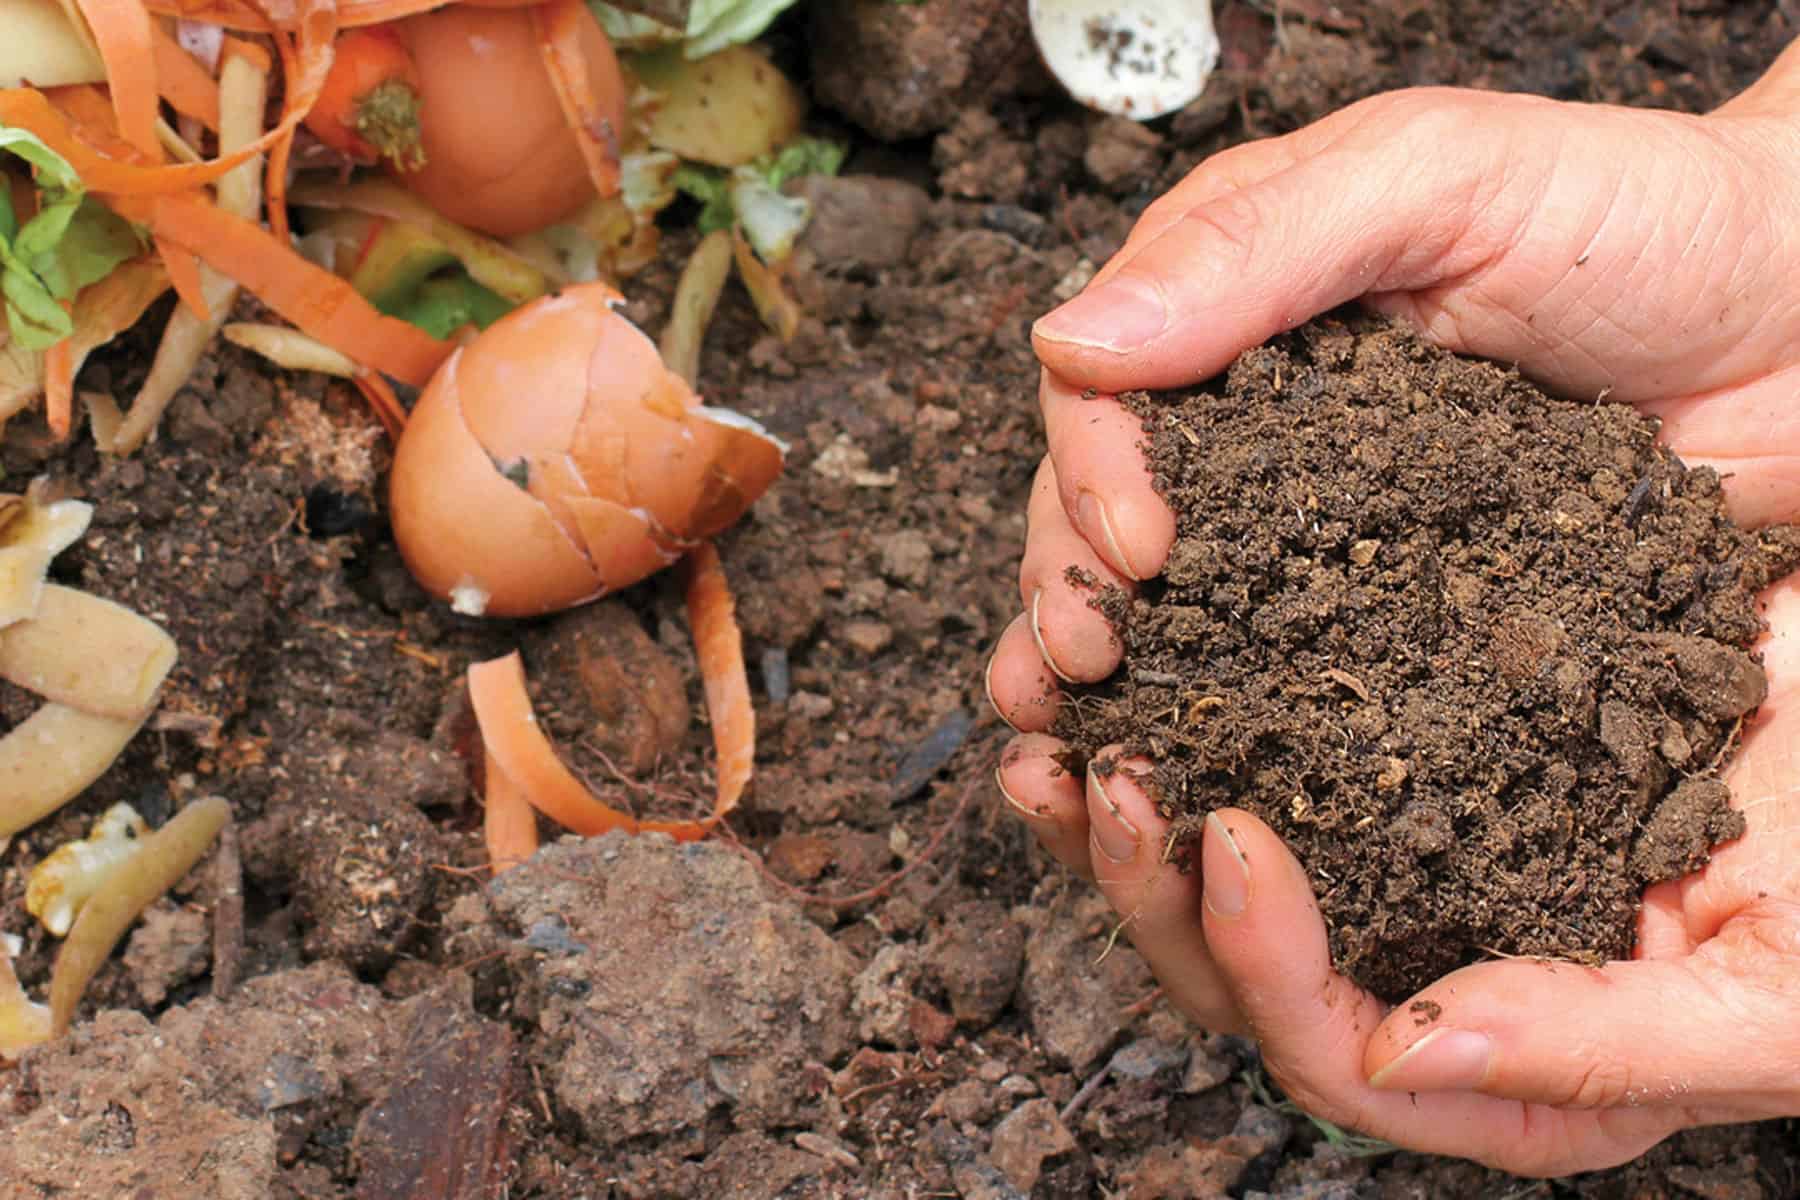 Hands holding soil, composting with kitchen scraps